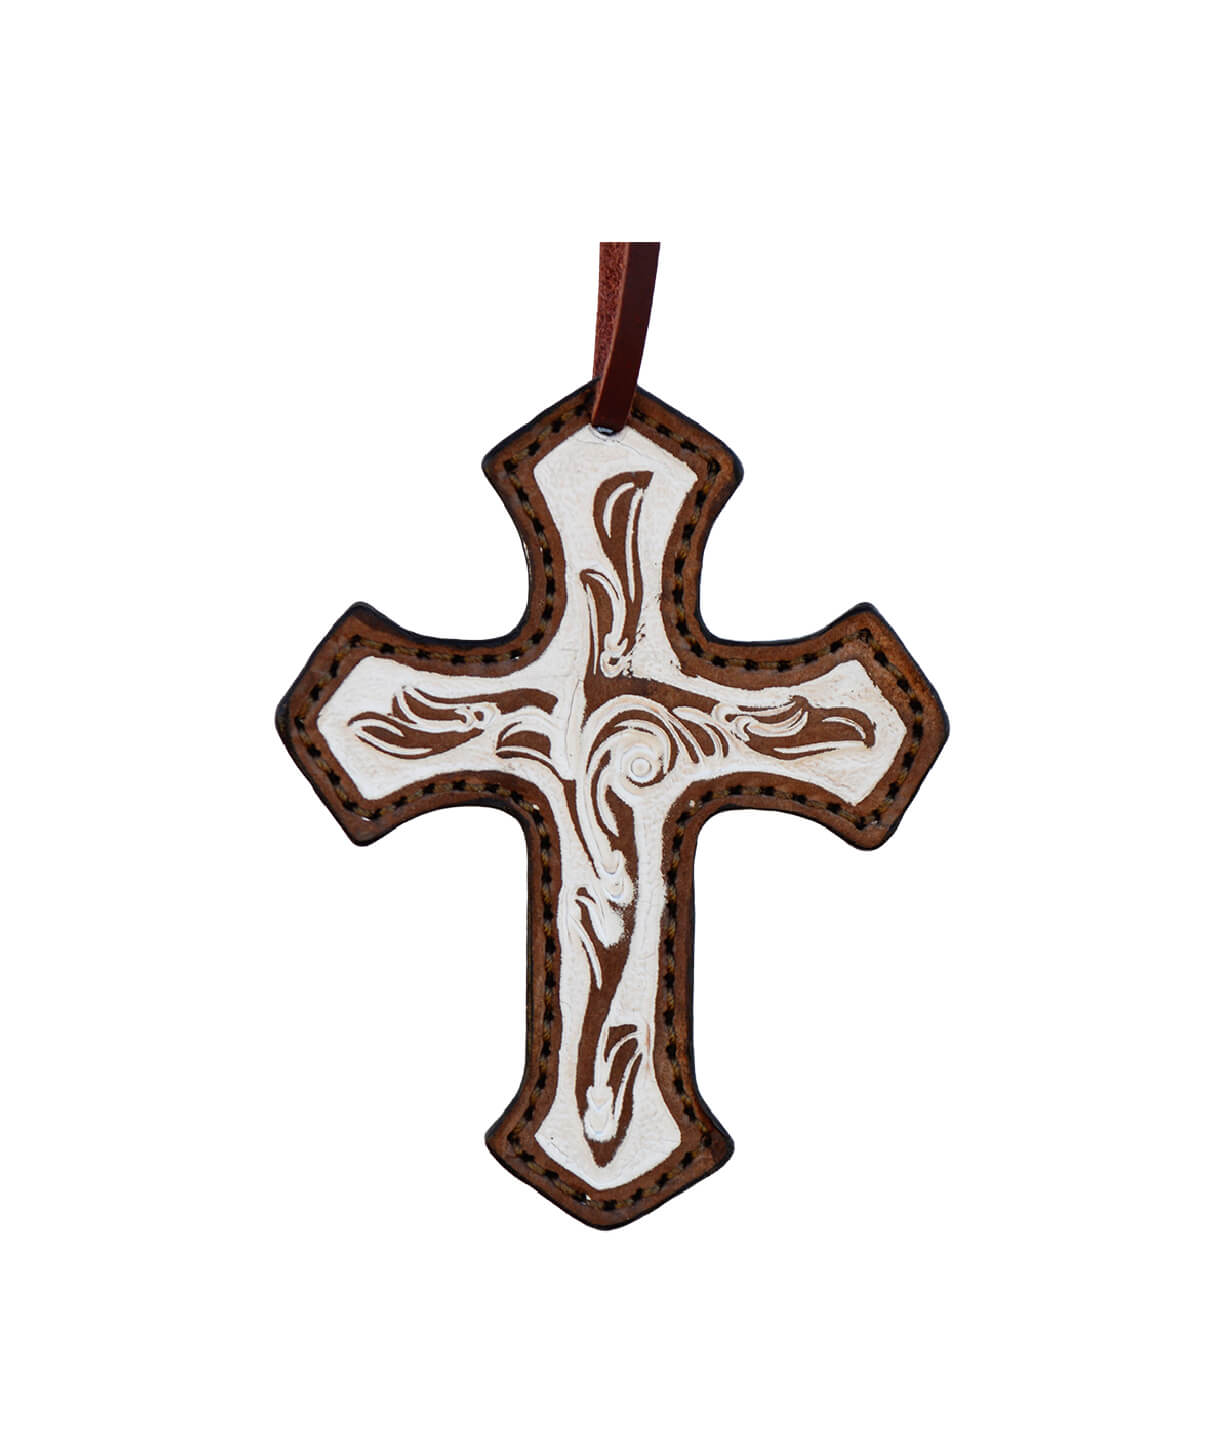 Cross rough out chocolate leather floral tooled with ivory rustic background paint.